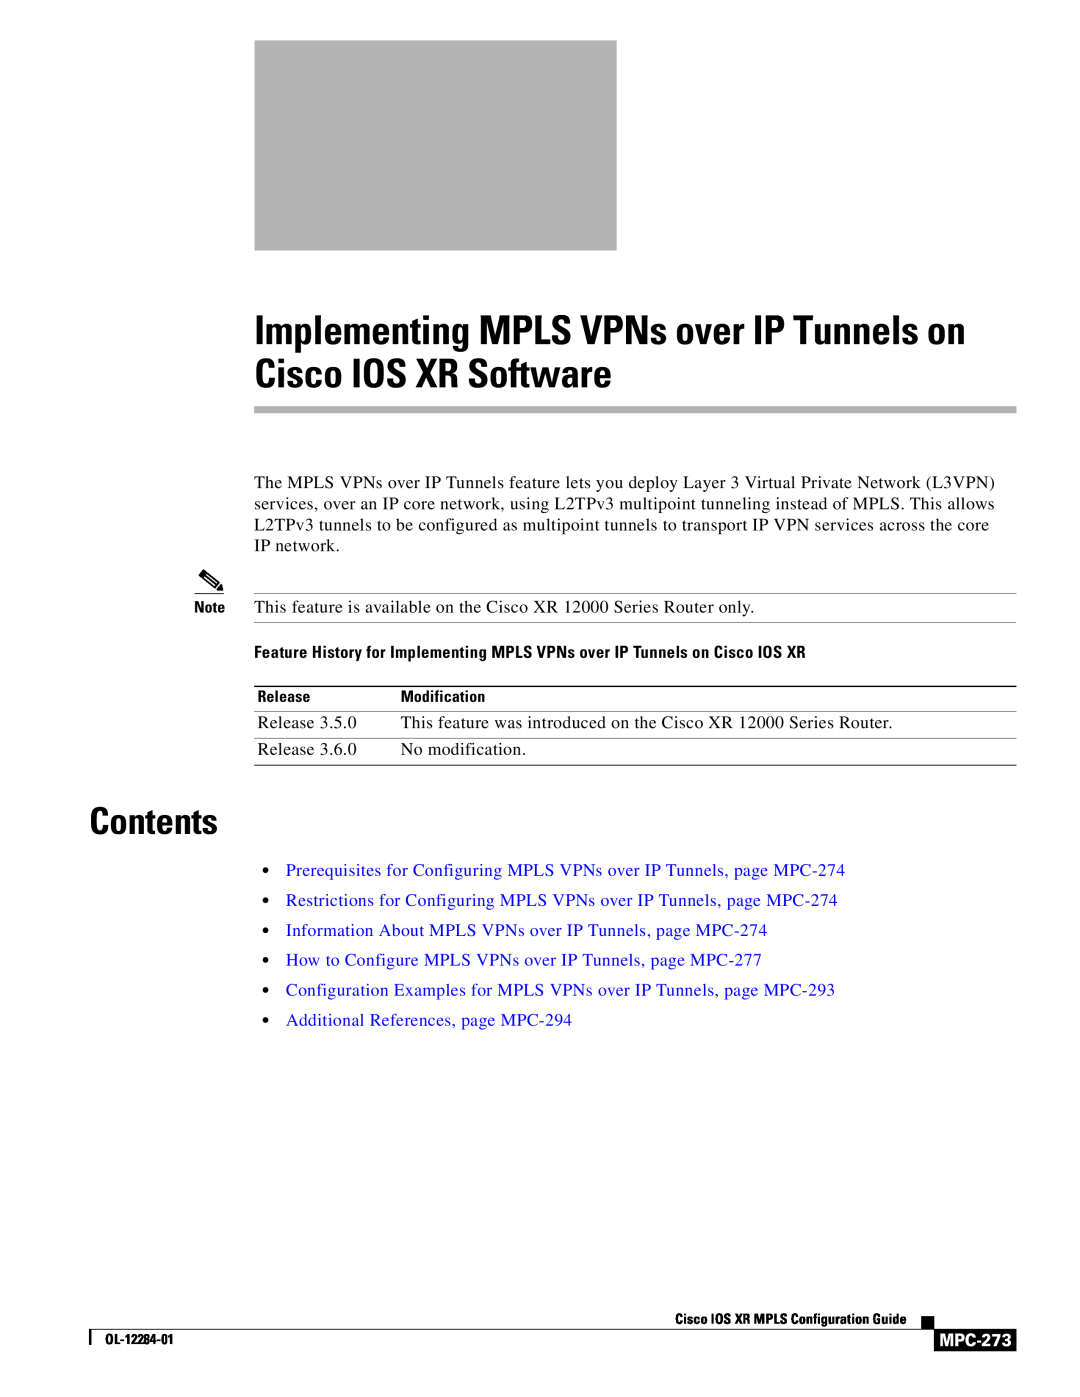 Cisco Systems MPC-273 manual Contents, Prerequisites for Configuring MPLS VPNs over IP Tunnels, page MPC-274 